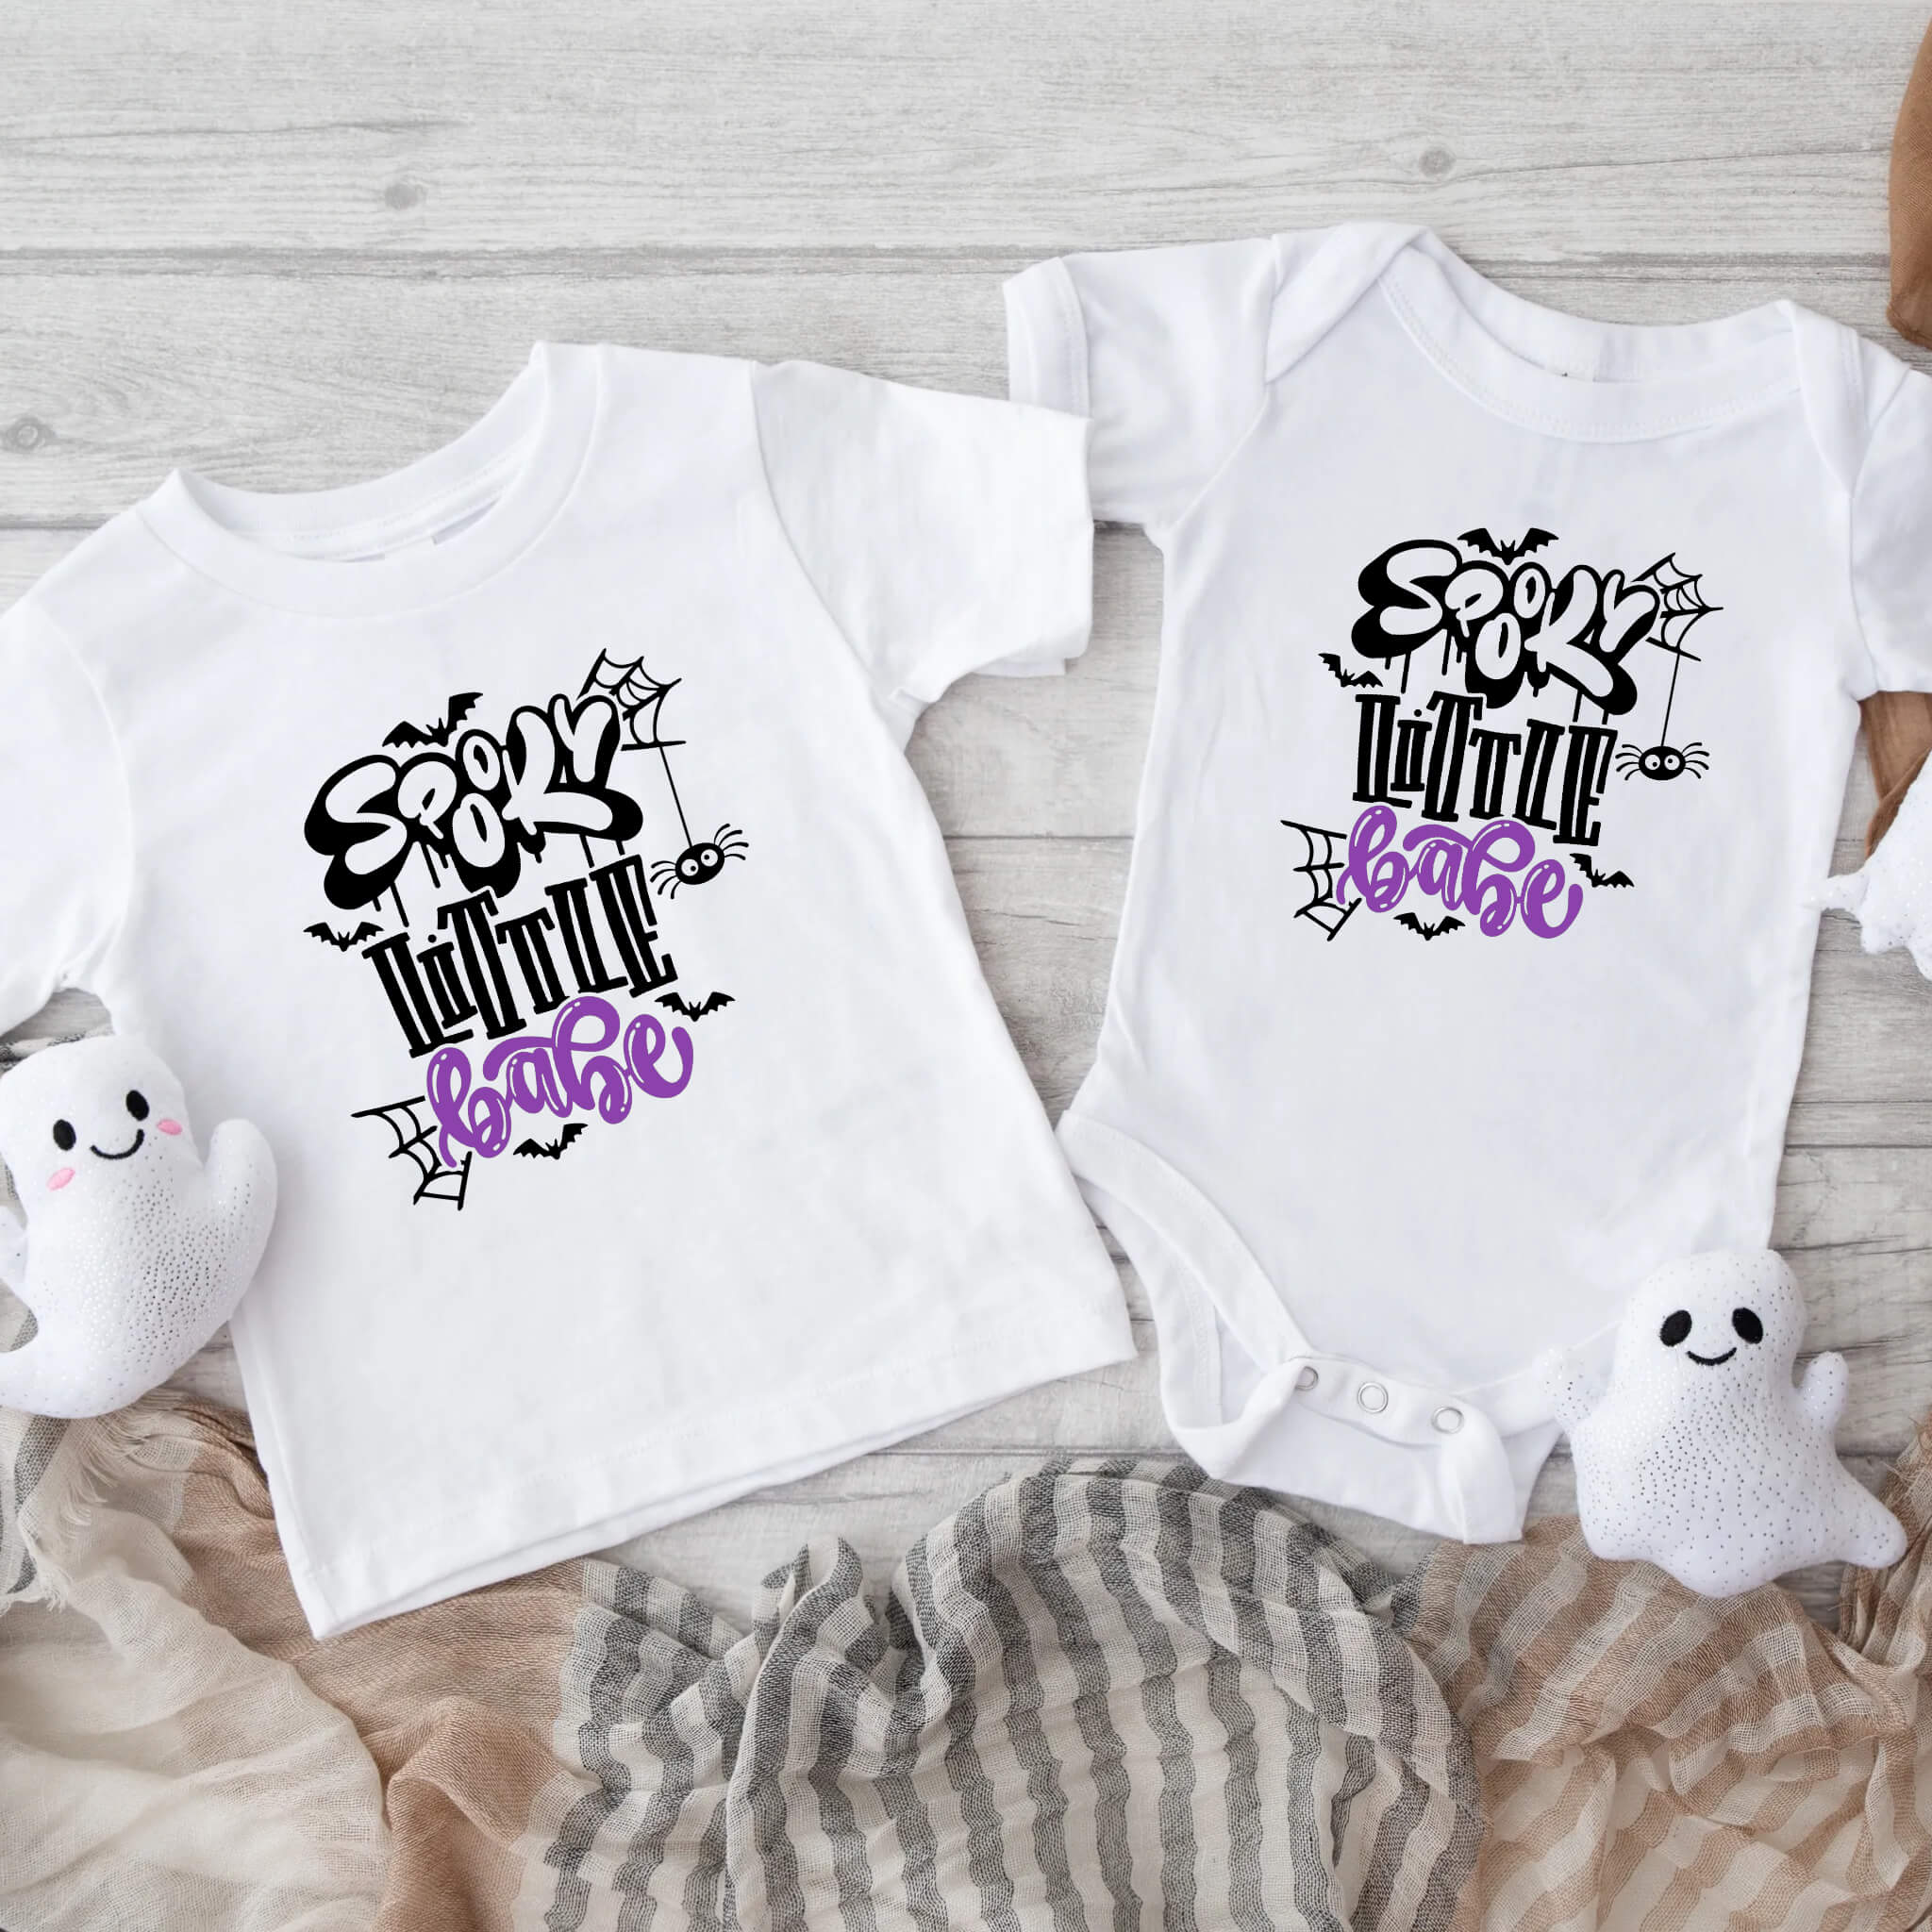 Halloween Spooky Little Babe Boy's or Girl's Customizable Baby Infant Toddler Graphic Print